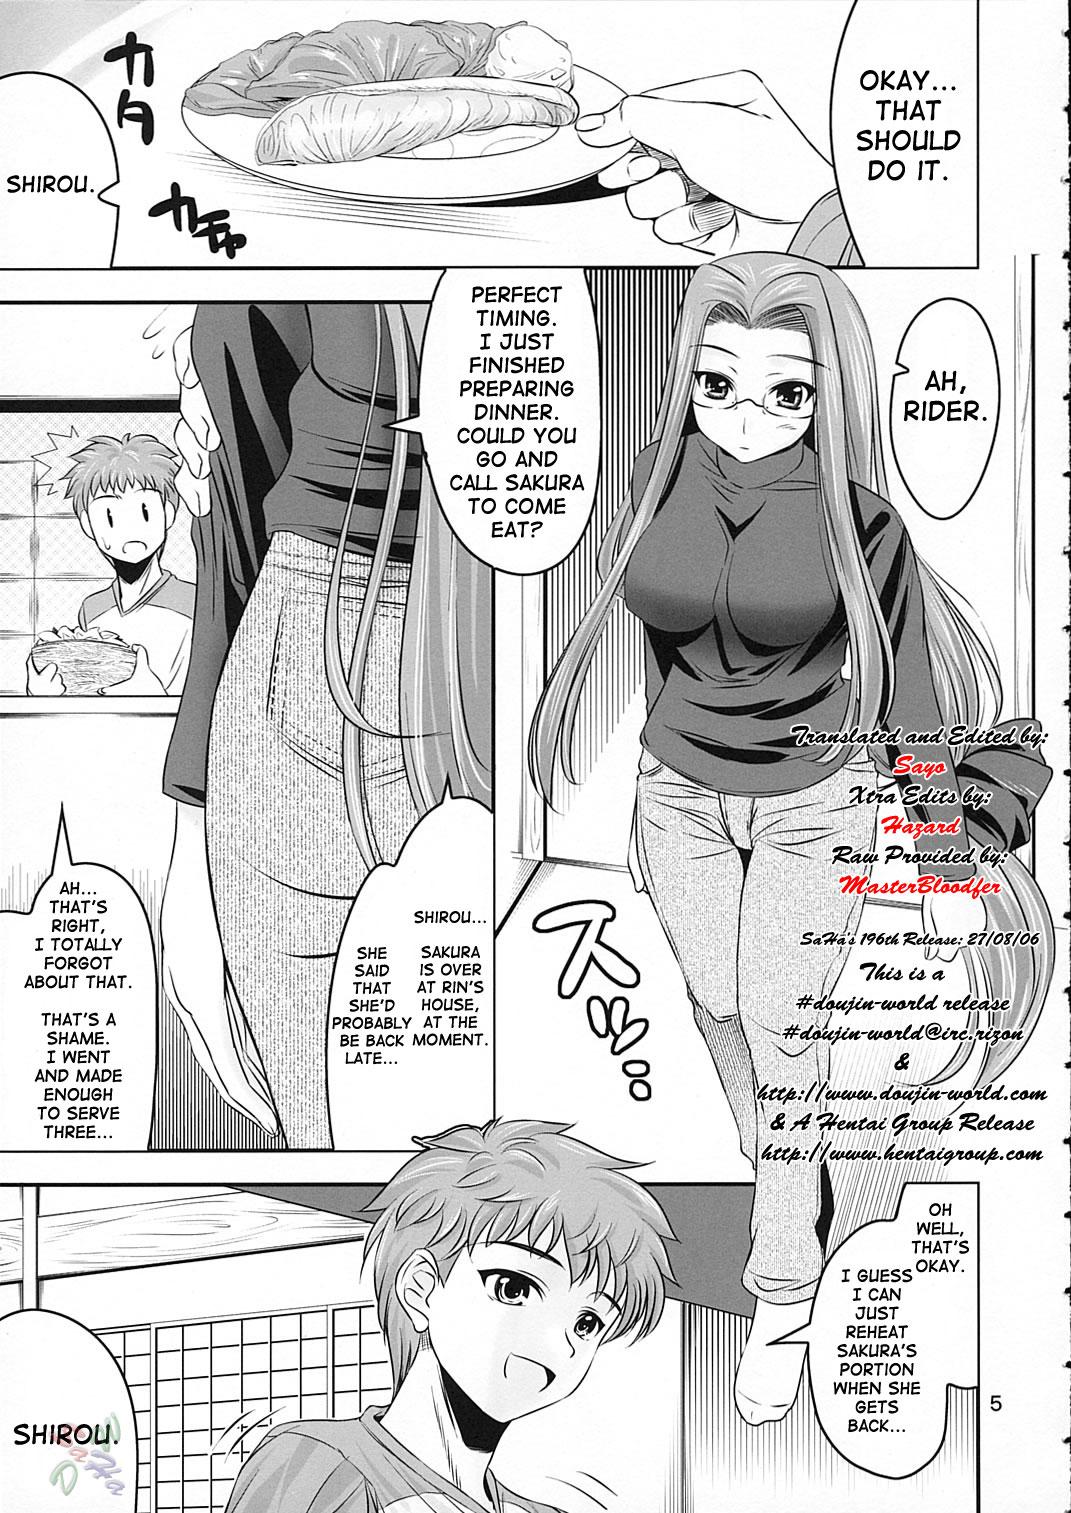 Cougars Simiken - Fate stay night Ball Busting - Page 5